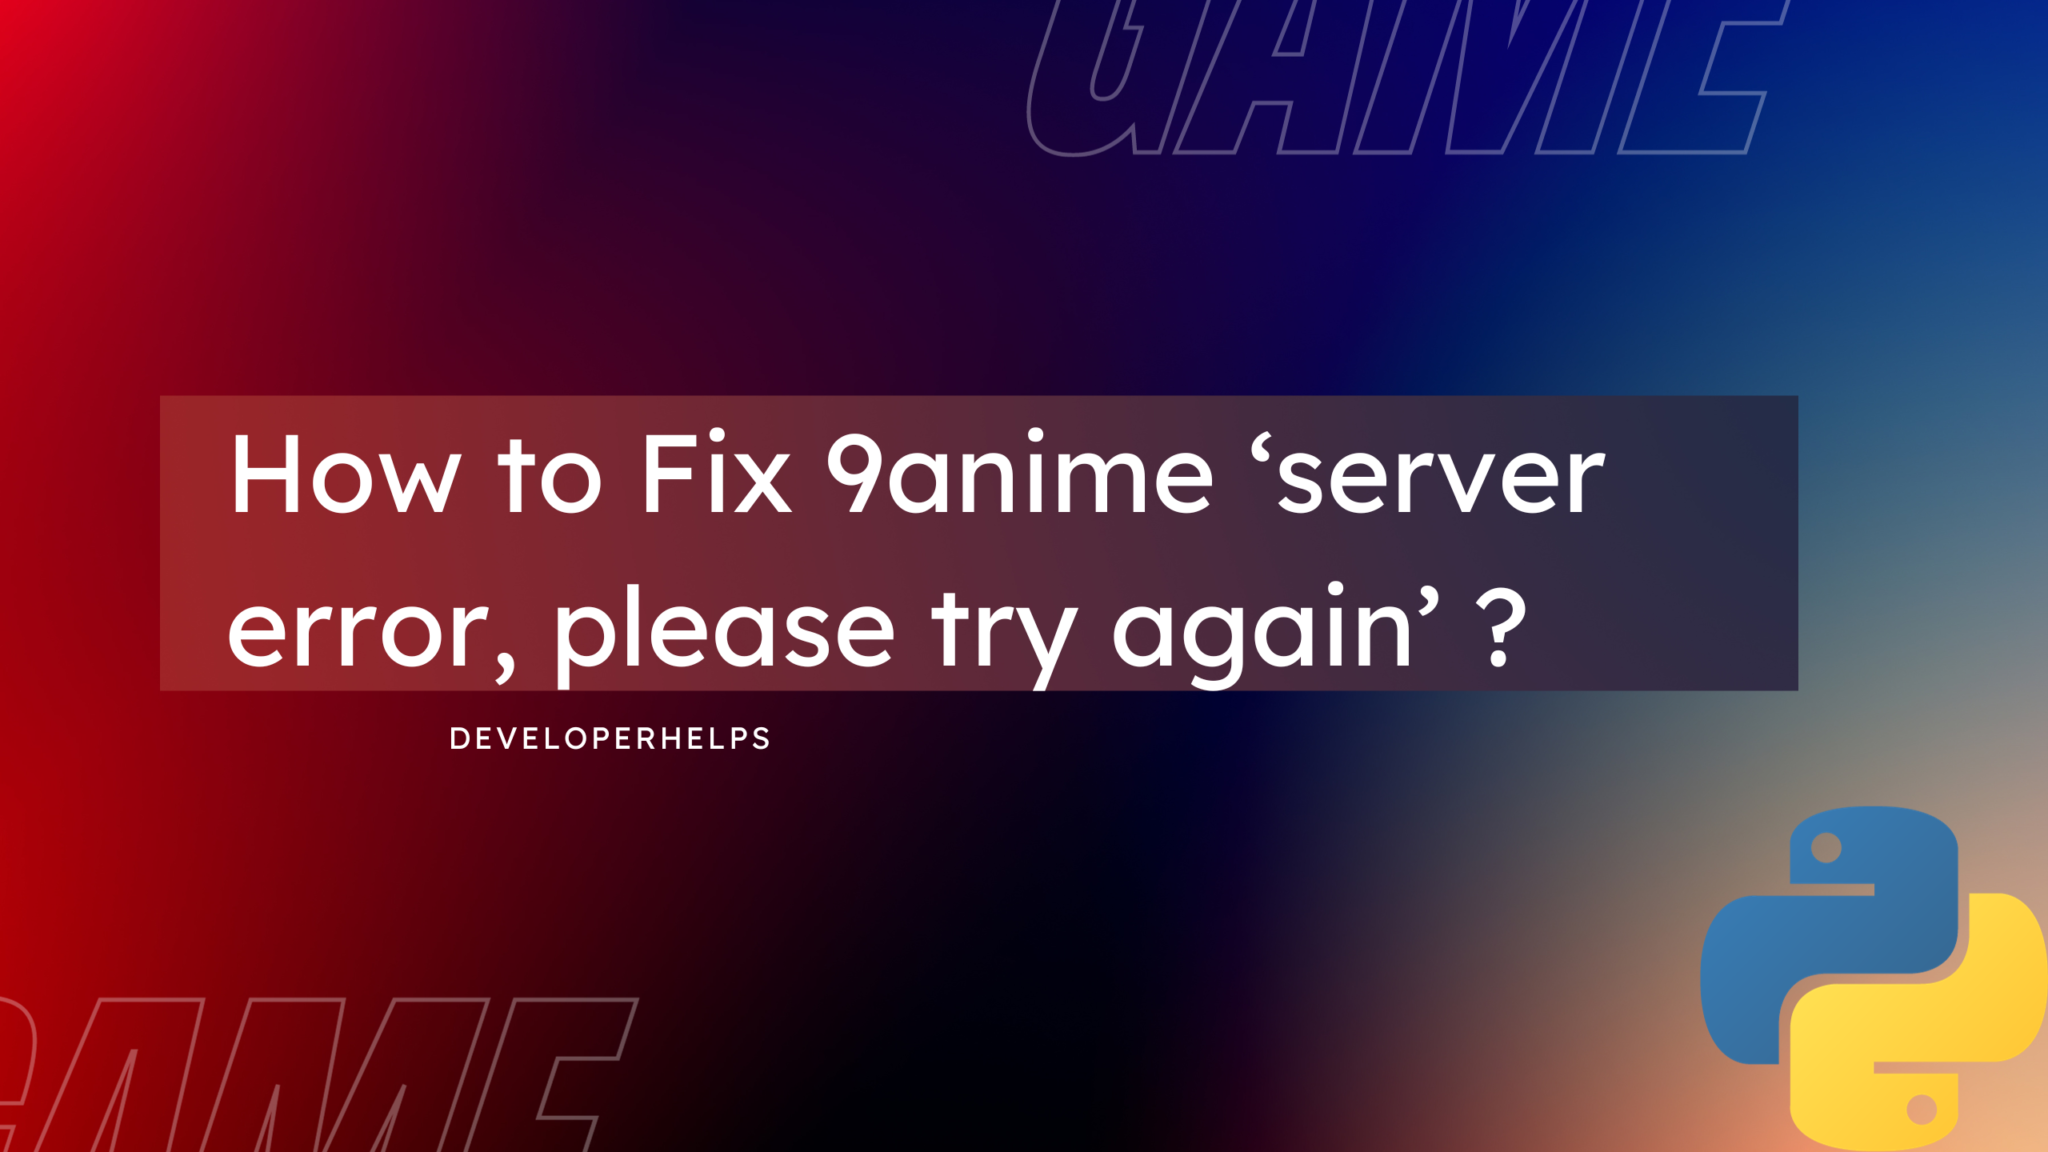 How to Fix 9anime ‘Server error, please try again’?